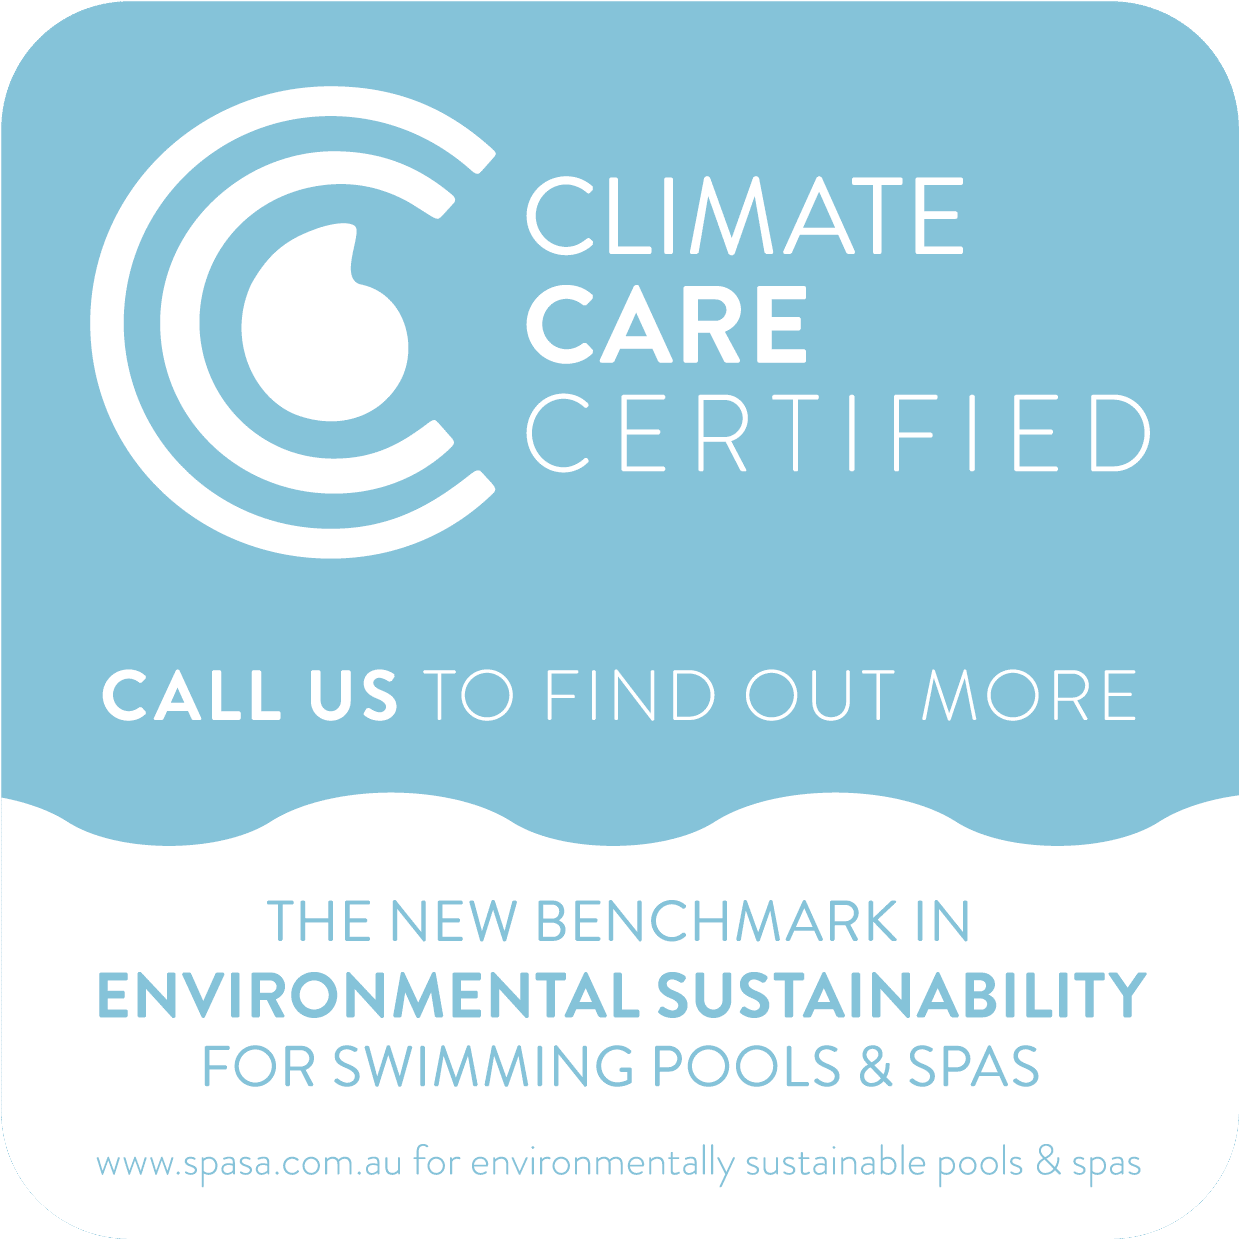 Climate Care Certified Product by SPASA Australia